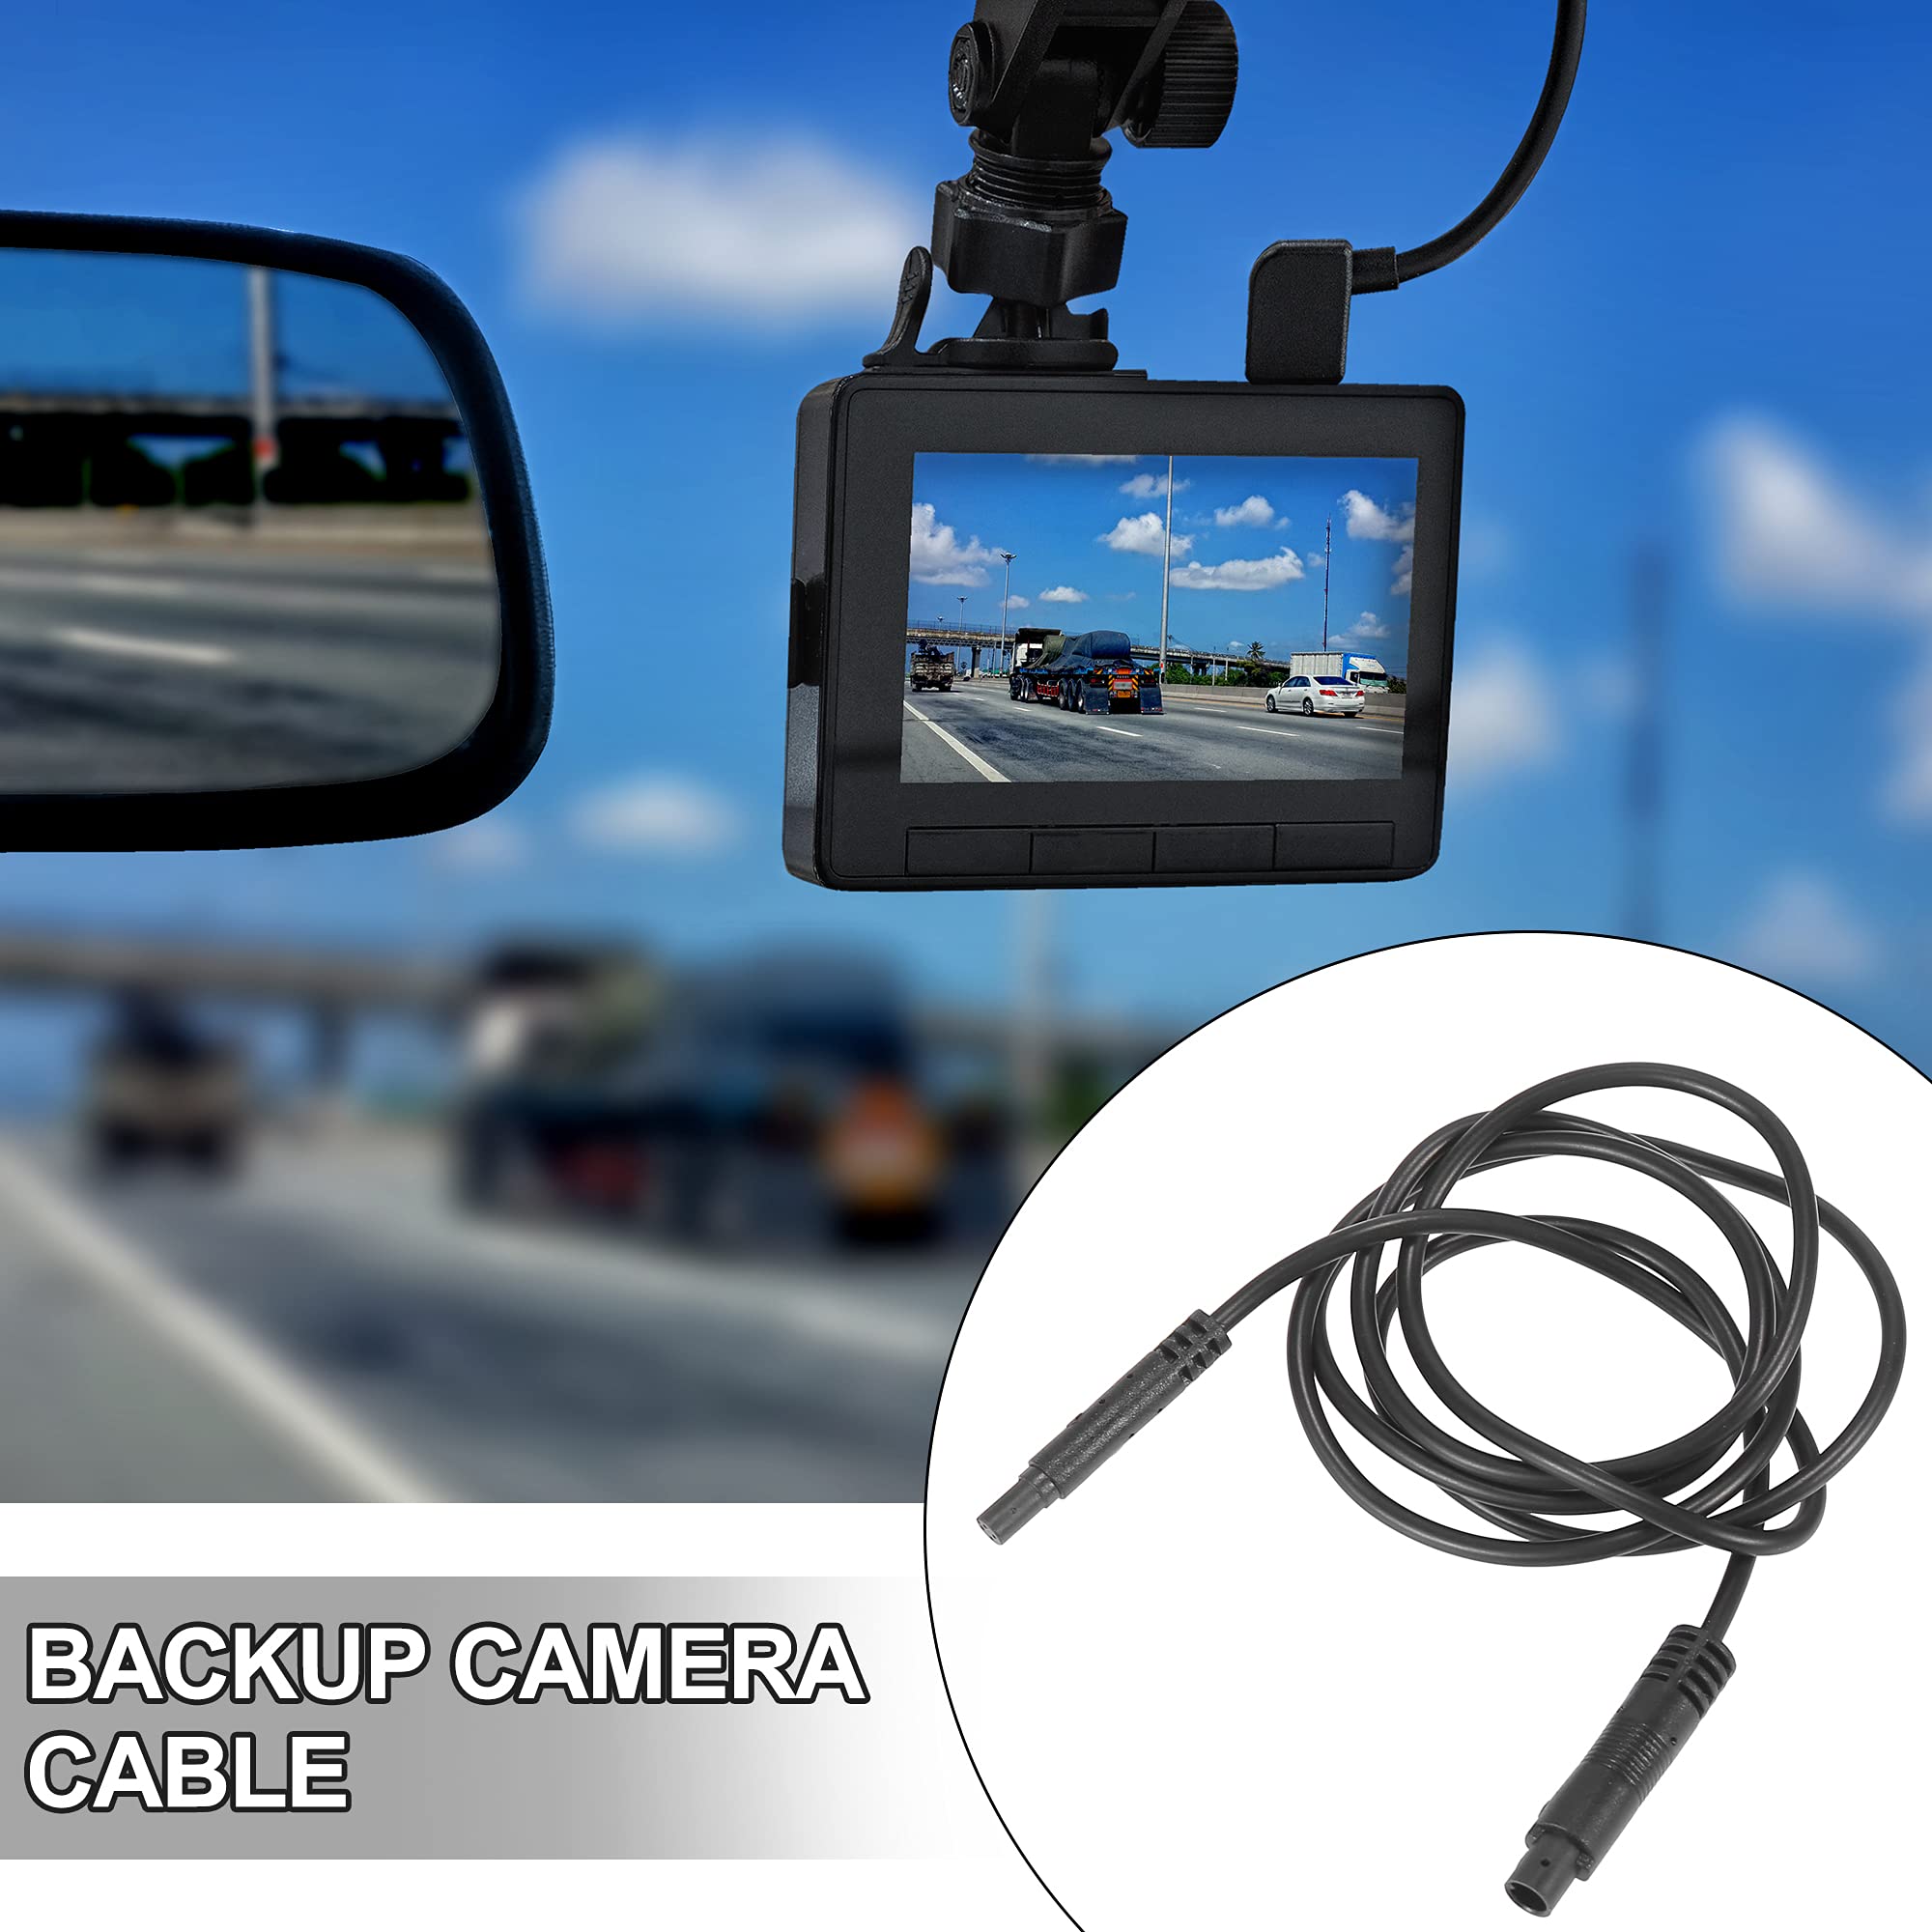 X AUTOHAUX 4 Pin 3ft 1m Backup Camera Extension Cable Dash Camera Cord Car Rear View Camera